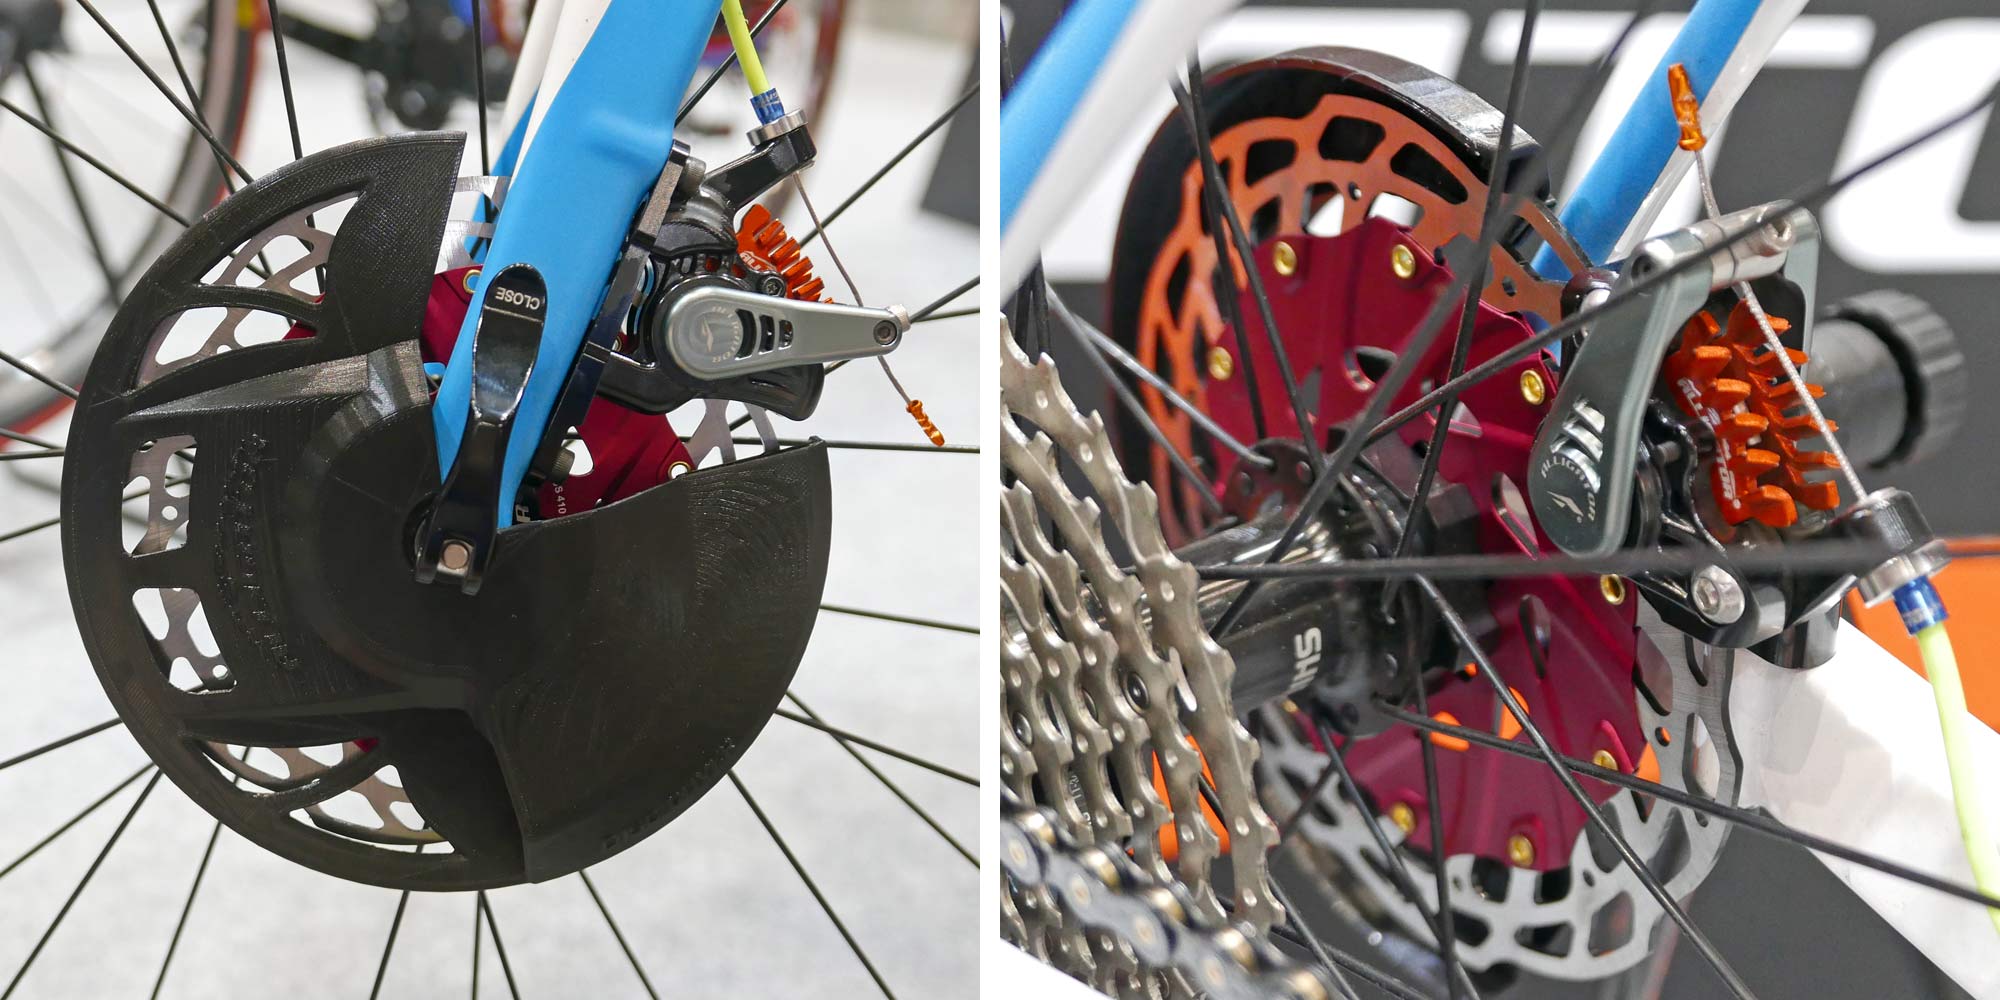 Alligator Disc Covers, prototype cooling rotor protectors, road bike disc brake rotor protective covers with integrated anti-overheating cooling